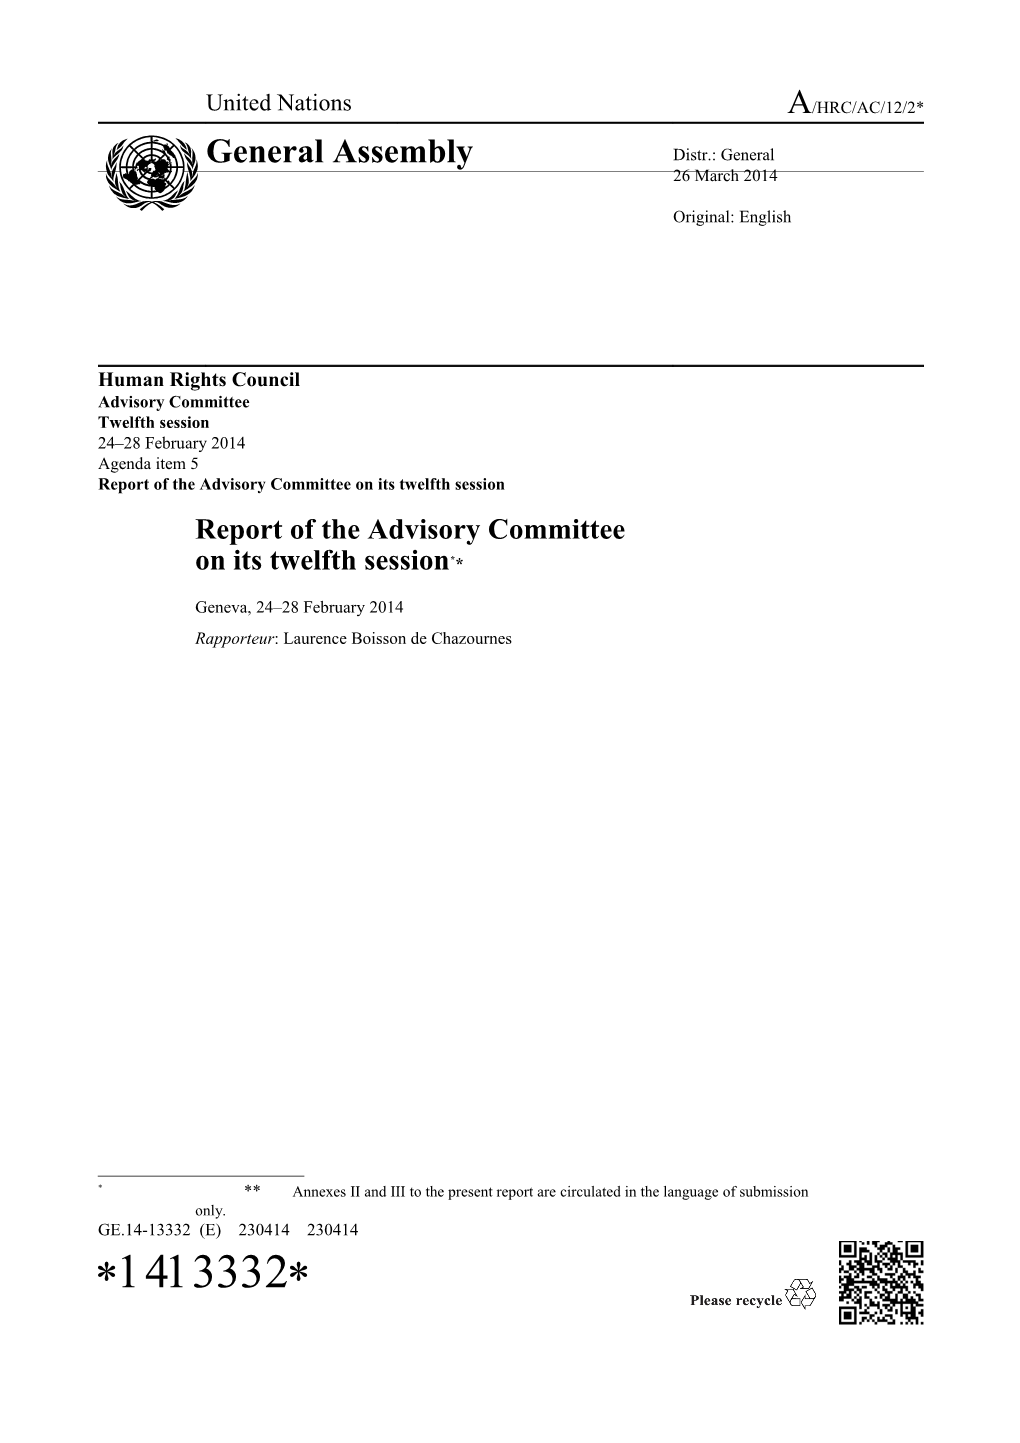 Report of the Advisory Committee on Its Twelfth Session